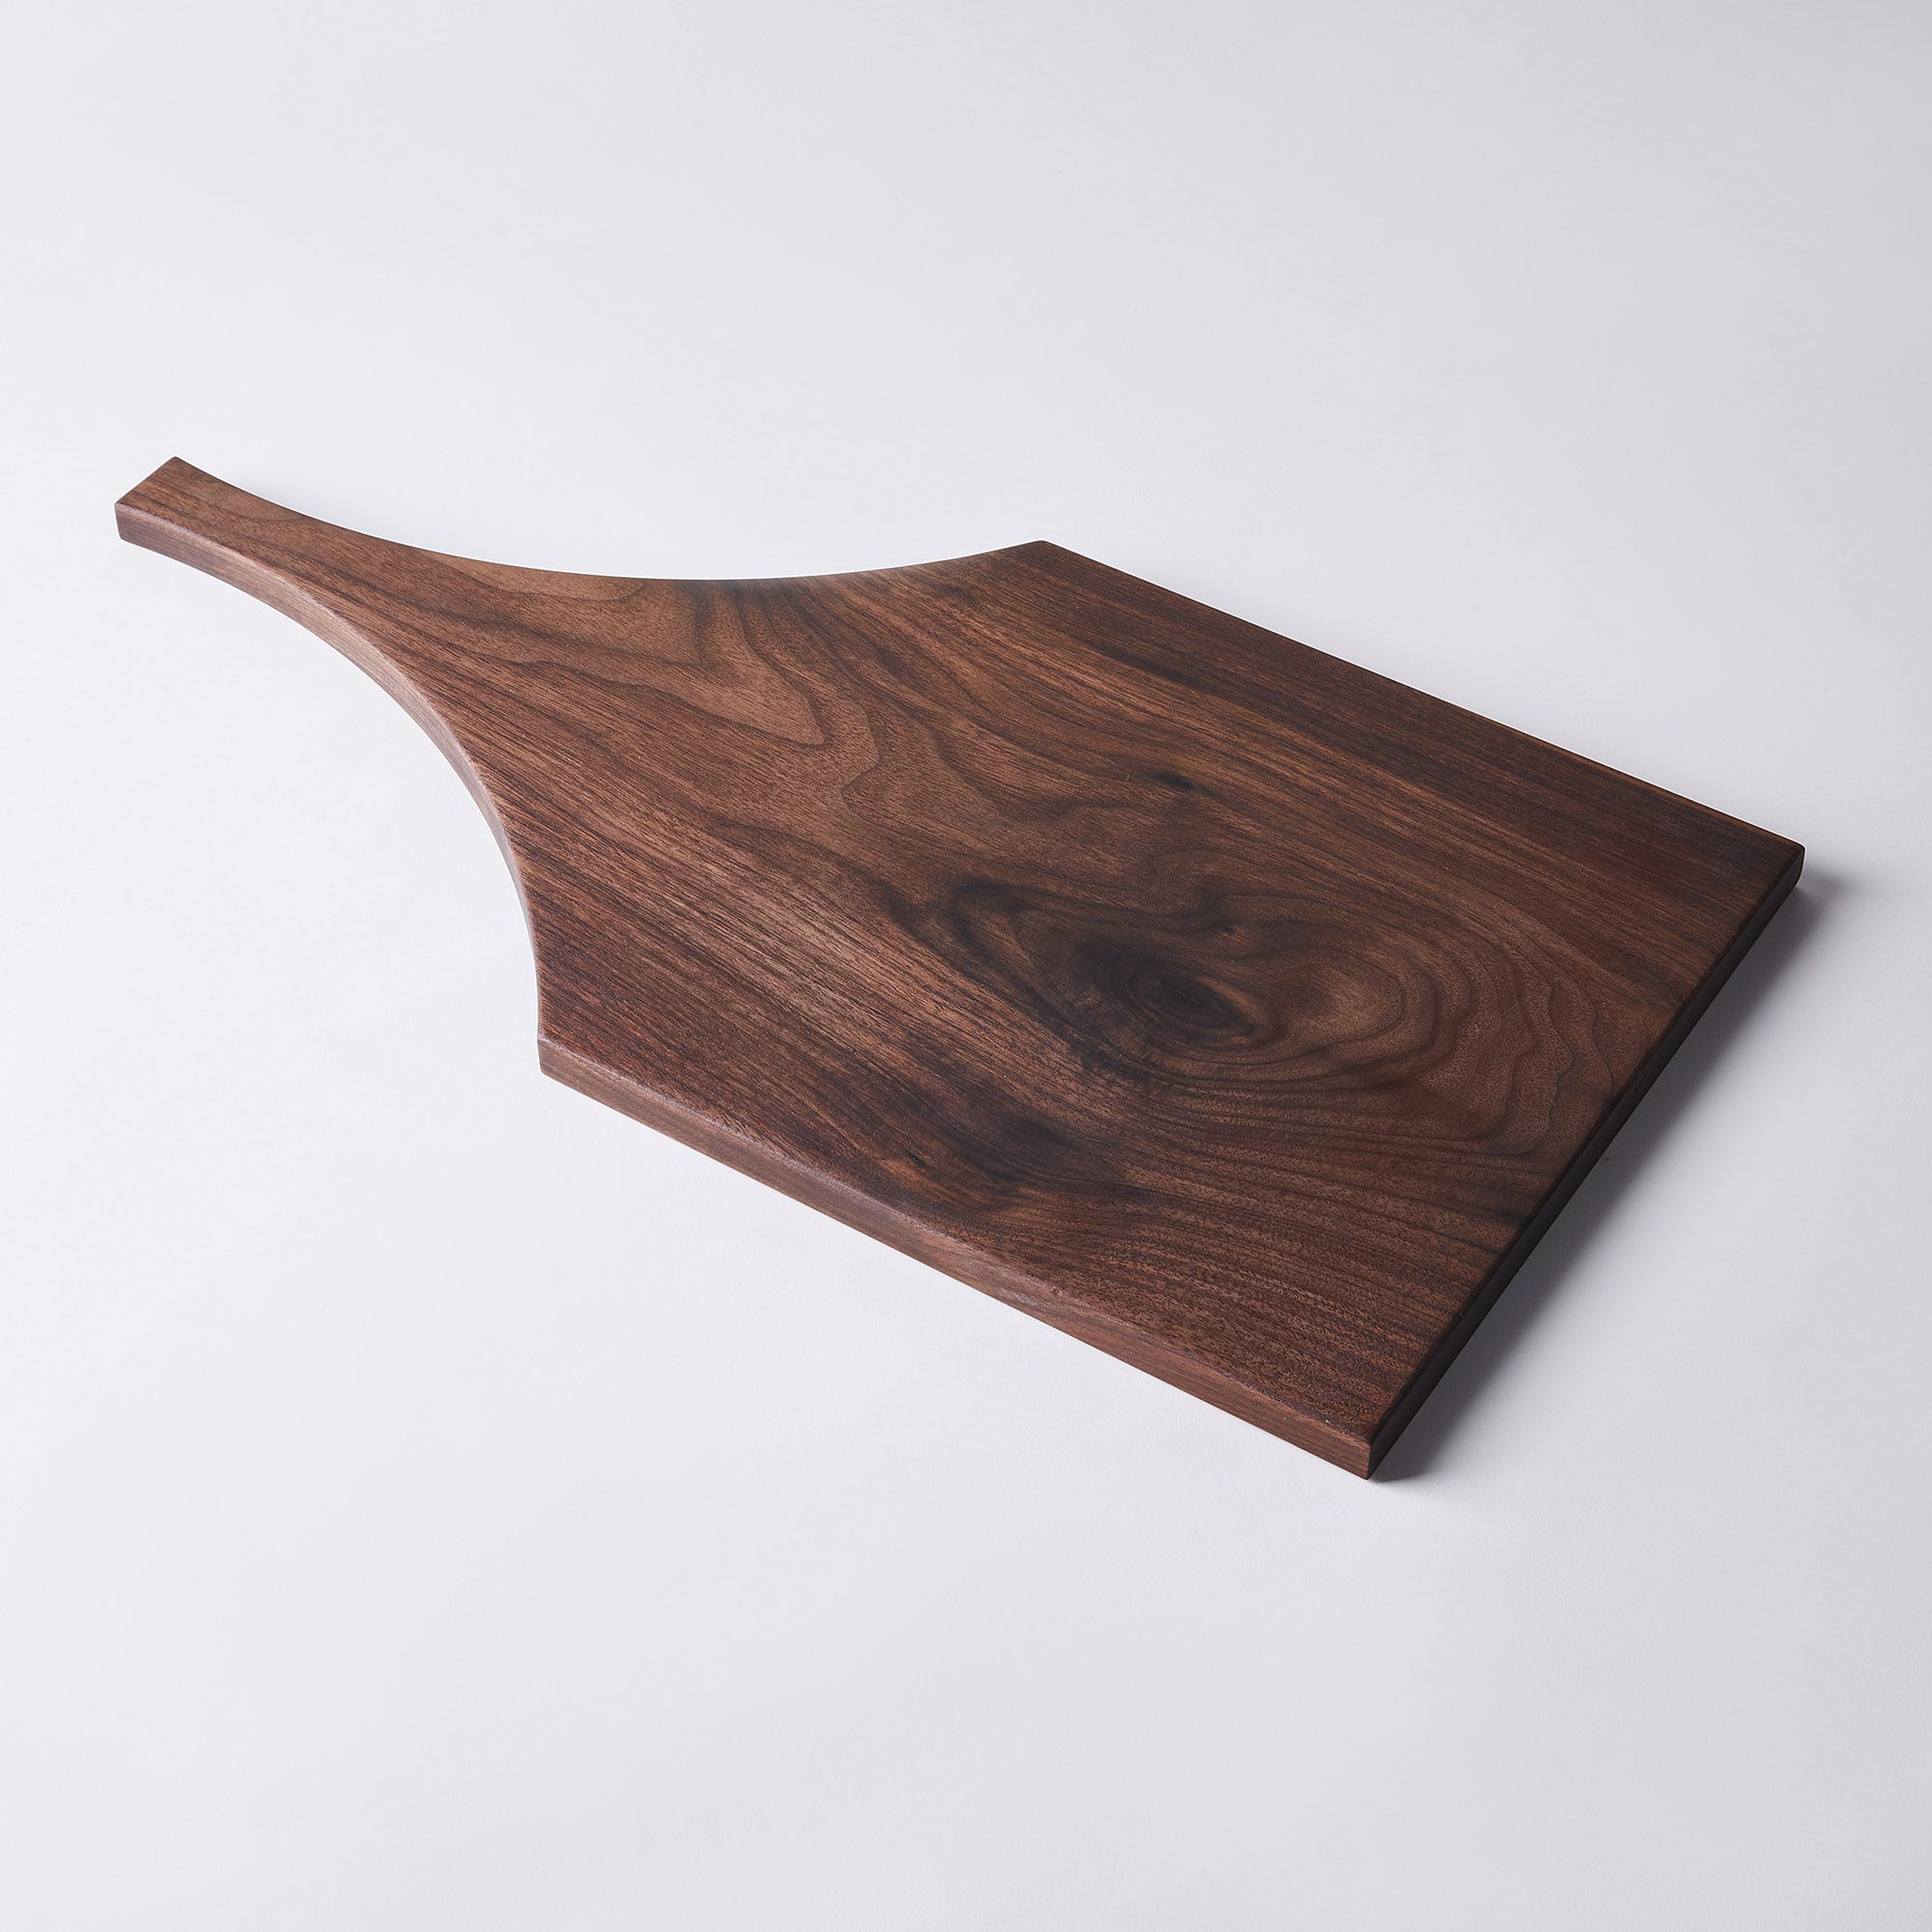 Wooden Plate in Walnut and Maple Wood Baguette Board Handmade serving board by Peg and Awl Kitchen Decor